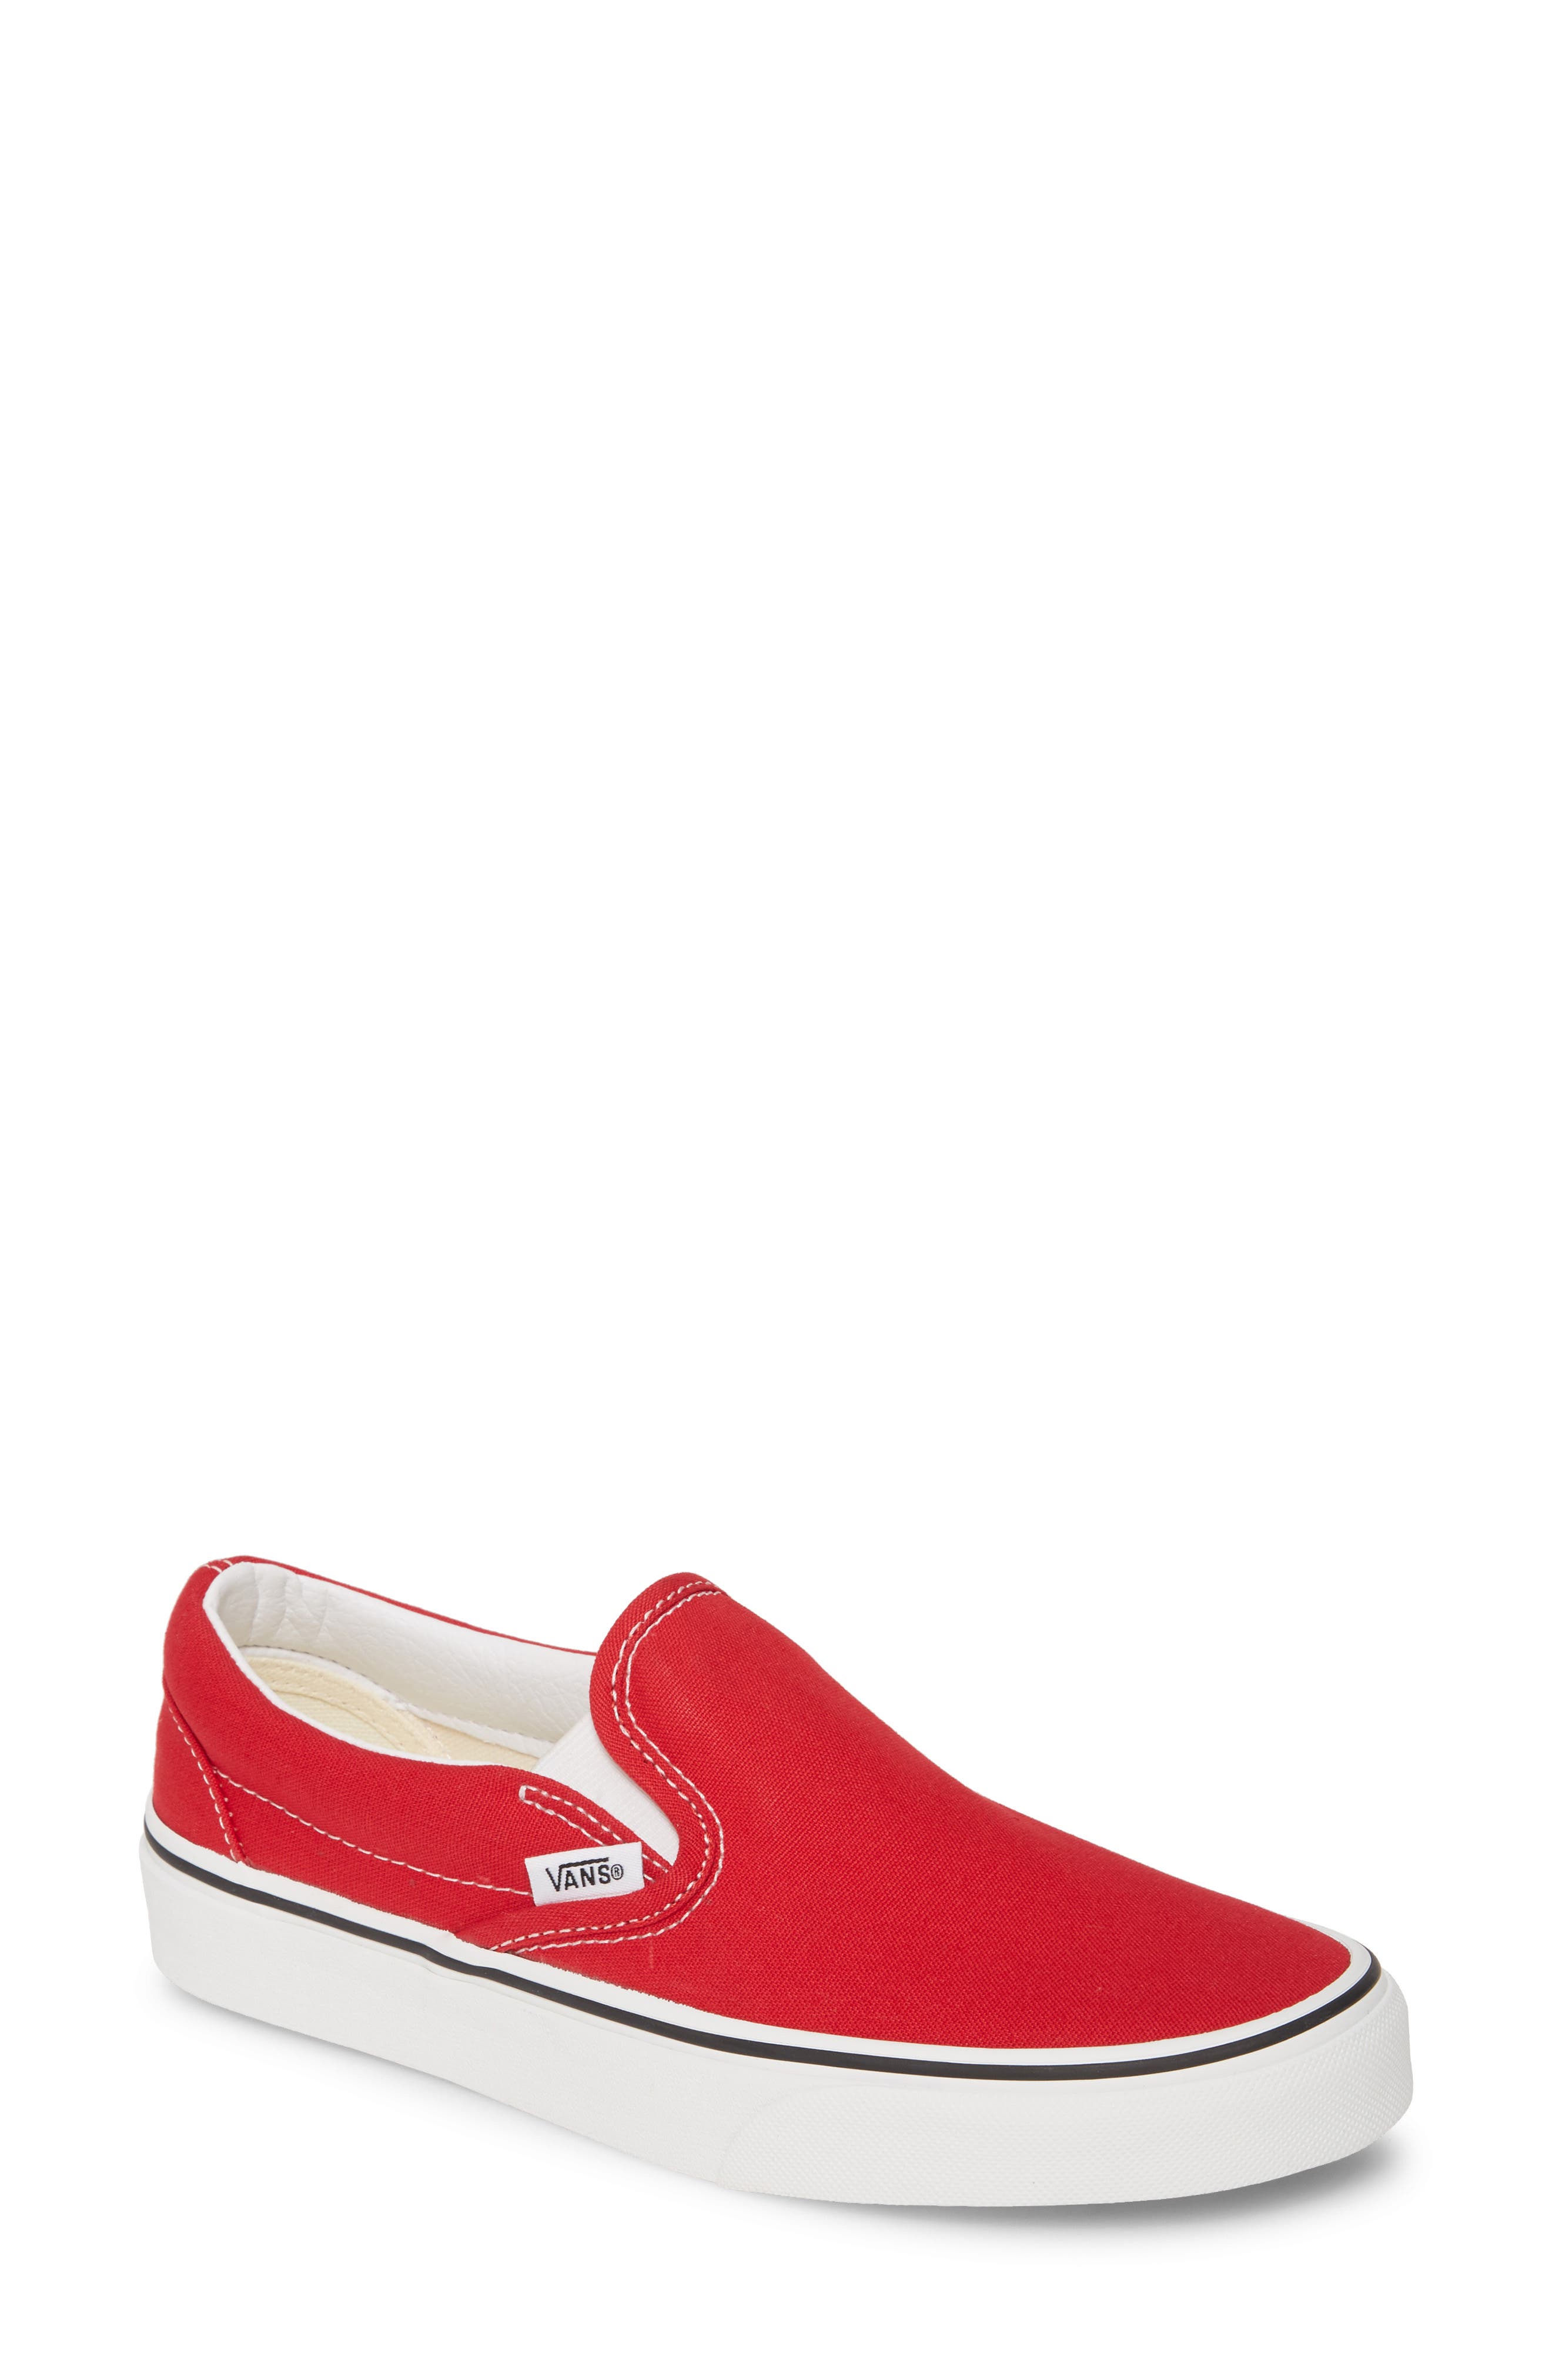 womens slip on trainers sale